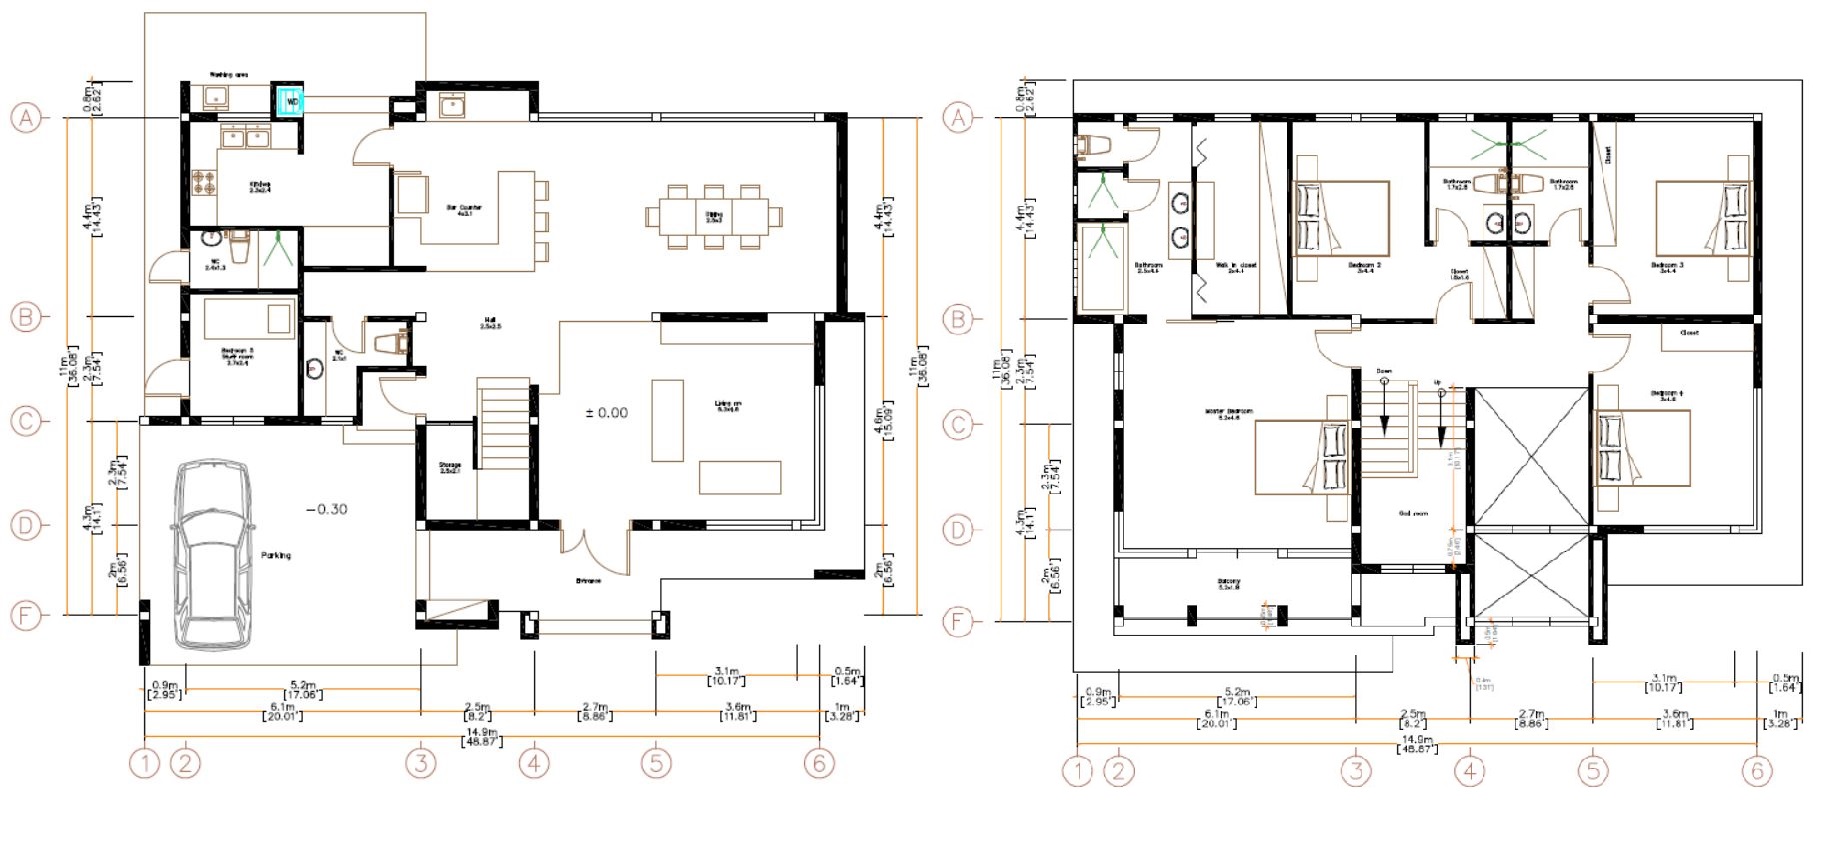 House design plans 14x11 m with 4 Bedrooms Pdf Full Plan layout plan